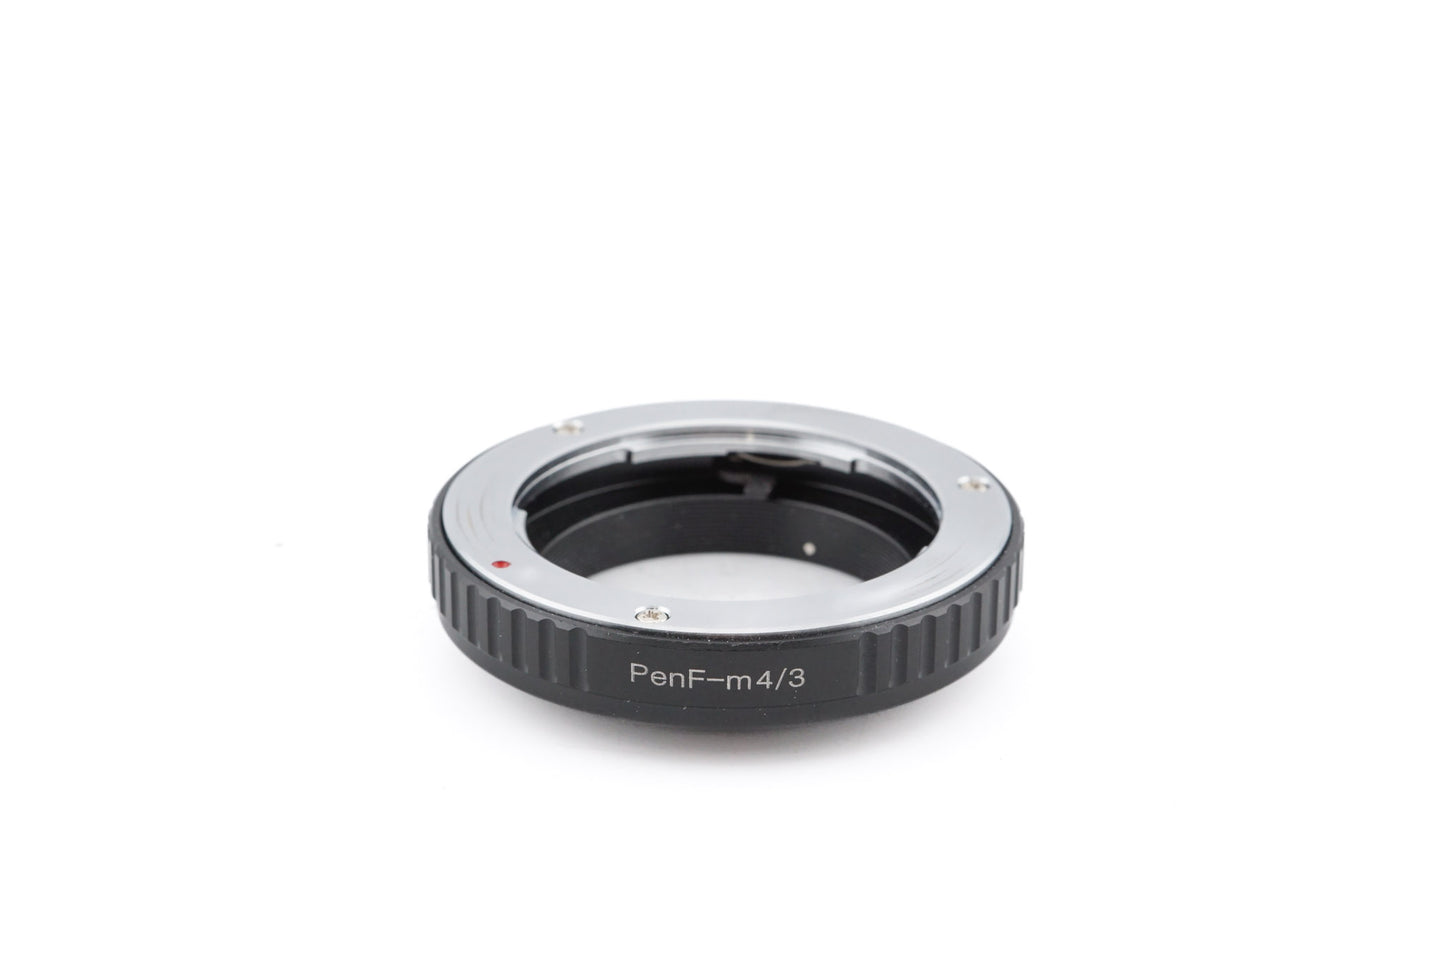 Generic Olympus Pen F - Micro Four Thirds (PenF - M4/3) Adapter - Lens Adapter